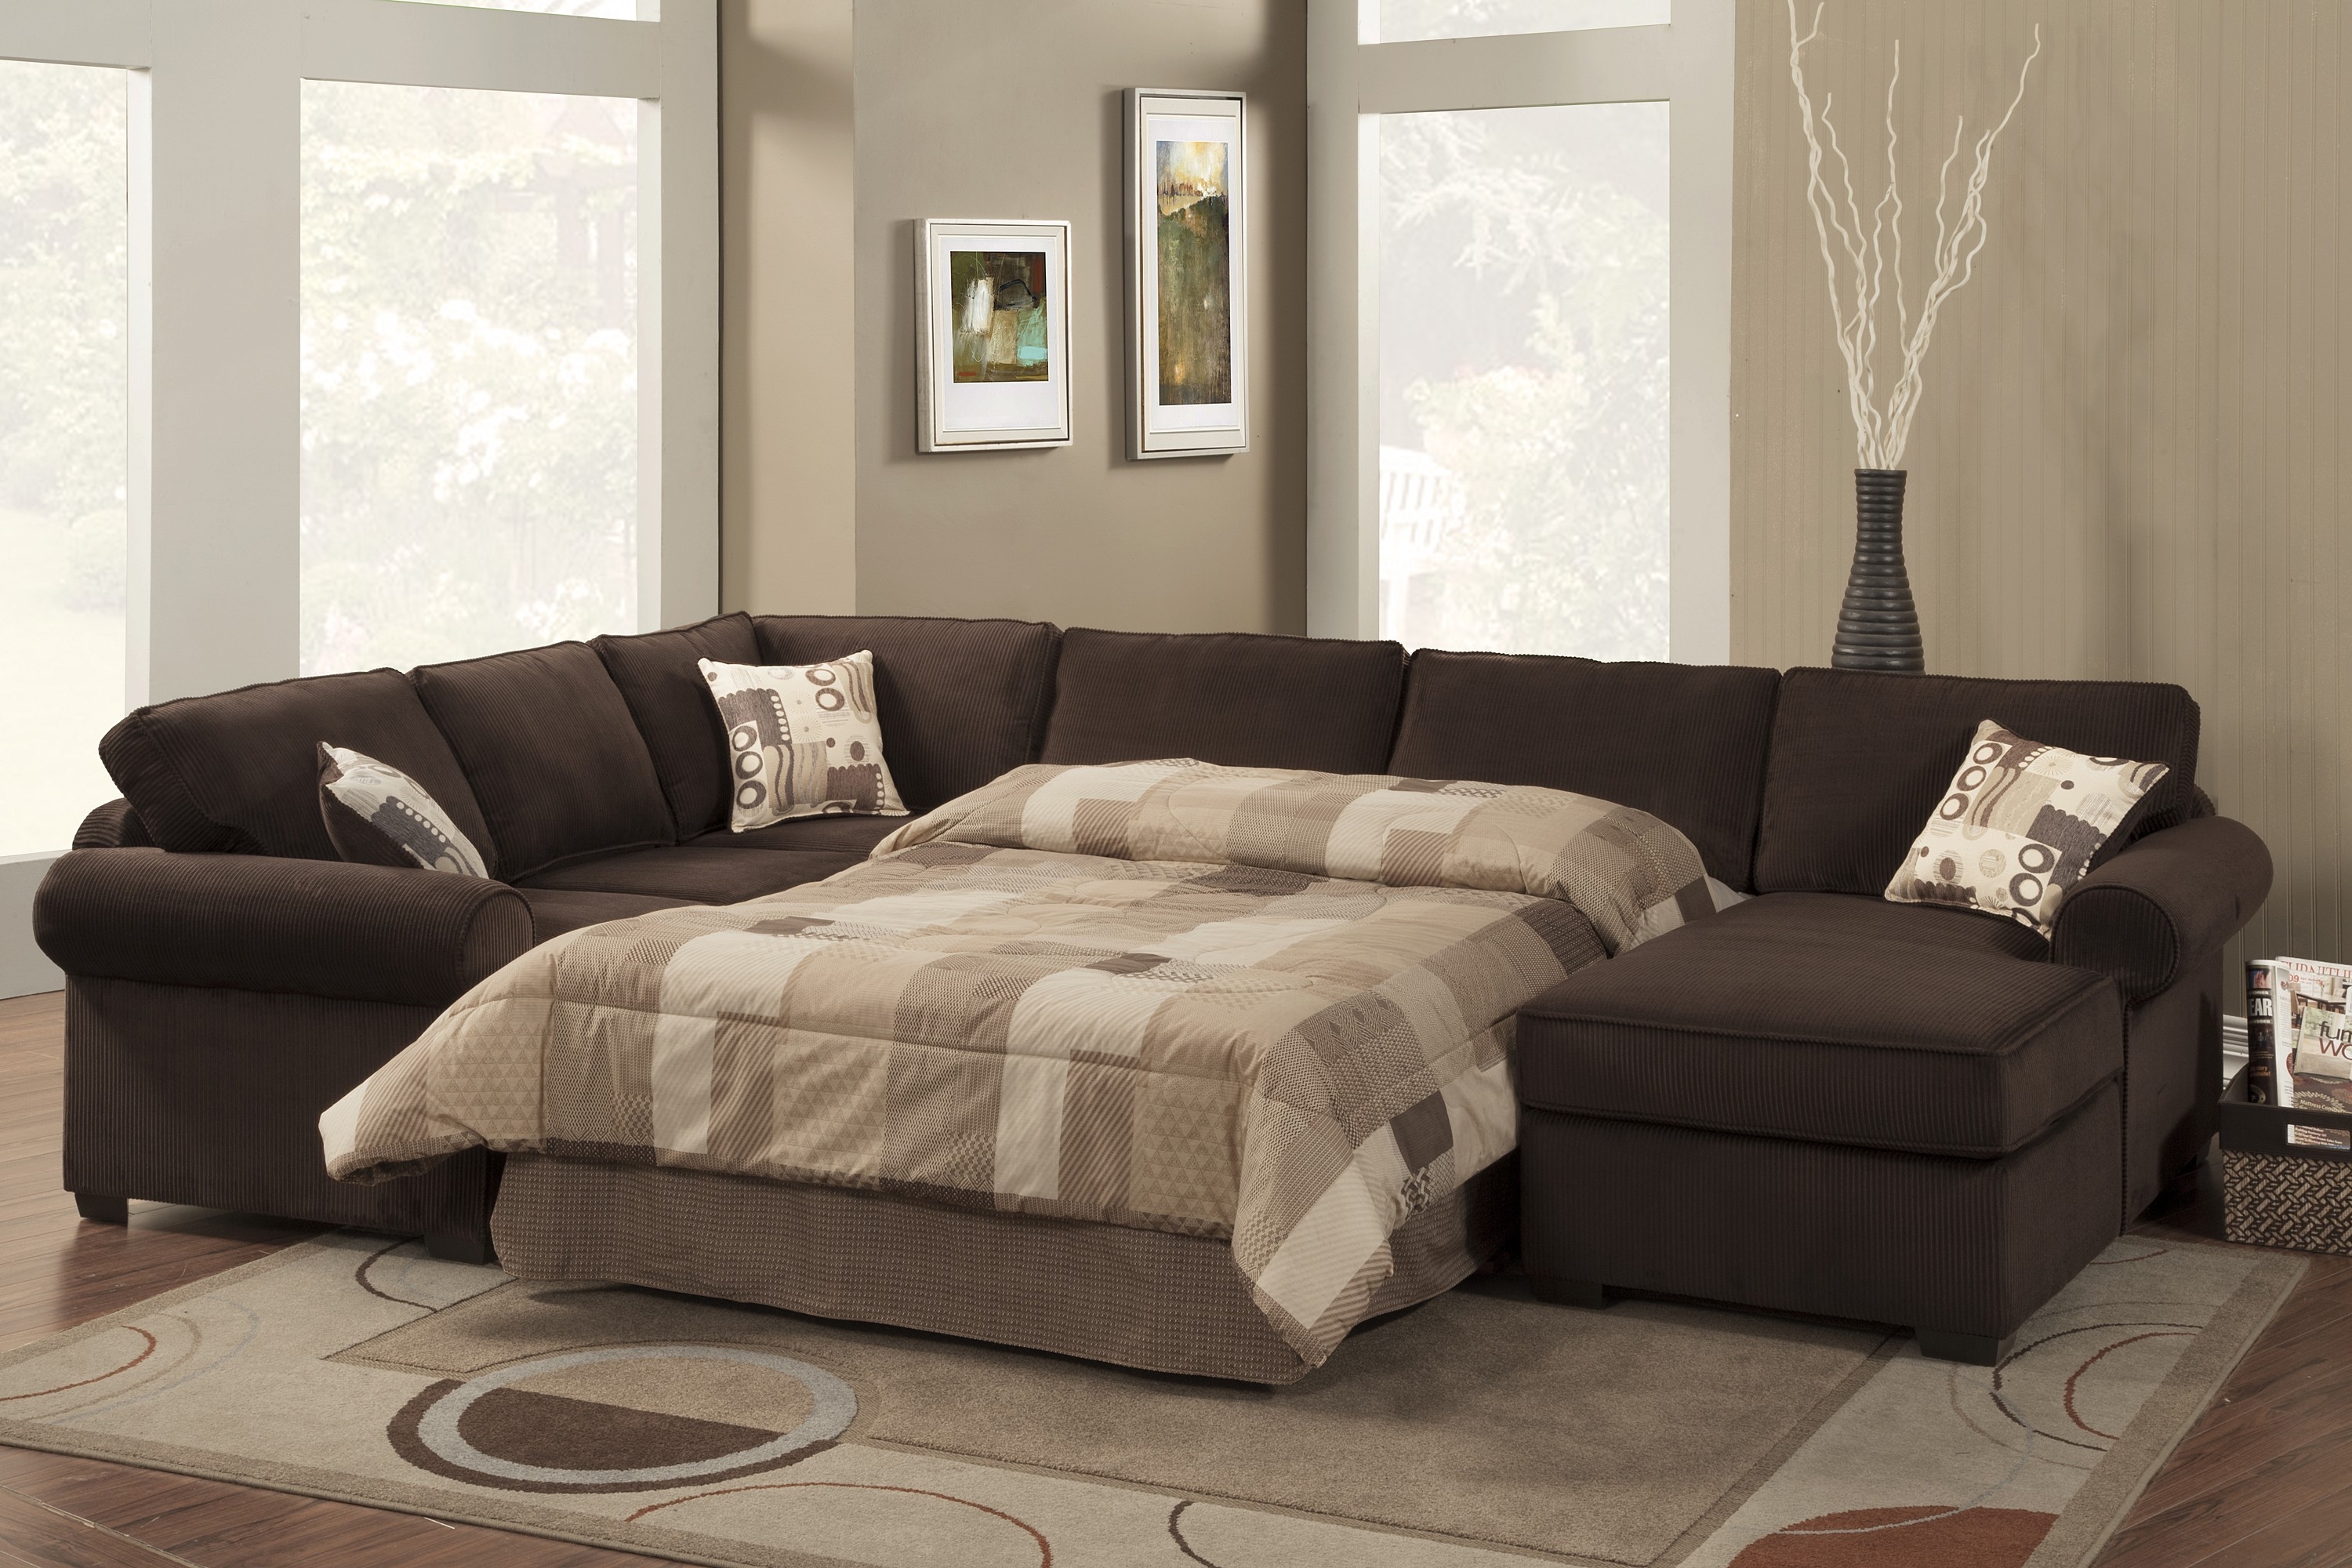 Best Elegant Sectional Sofa With Sleeper And Chaise 41 On Sectional Sleeper Sofa sectional sleeper sofa